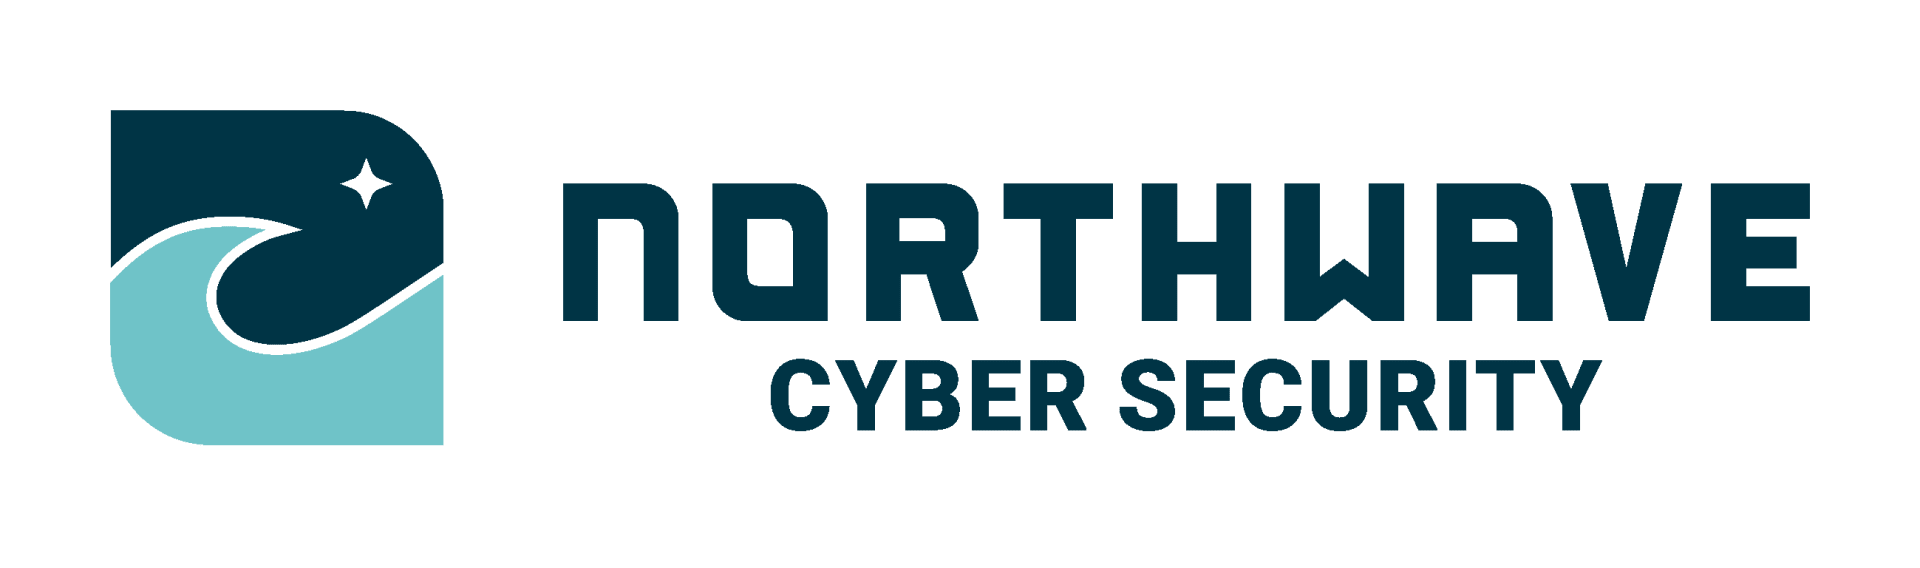 Northwave Cyber Security logo